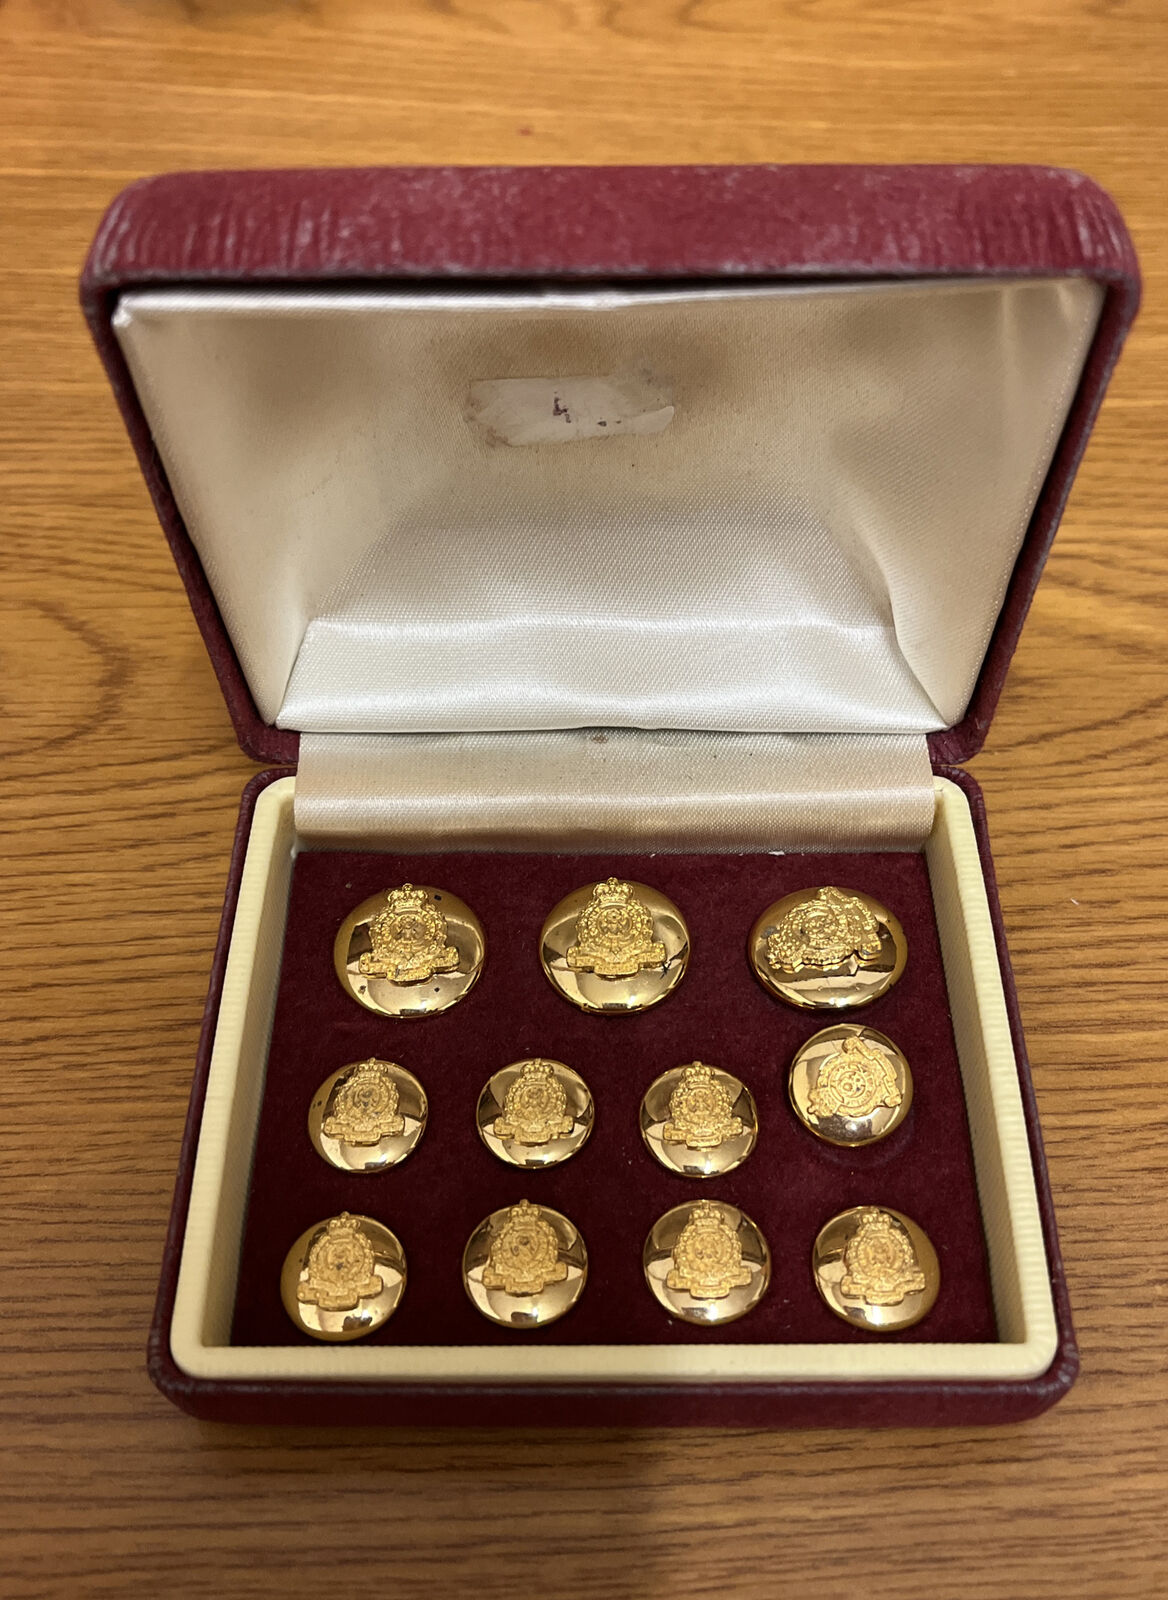 Button set of 11 Lancashire Fusiliers. Boxed. Matching.